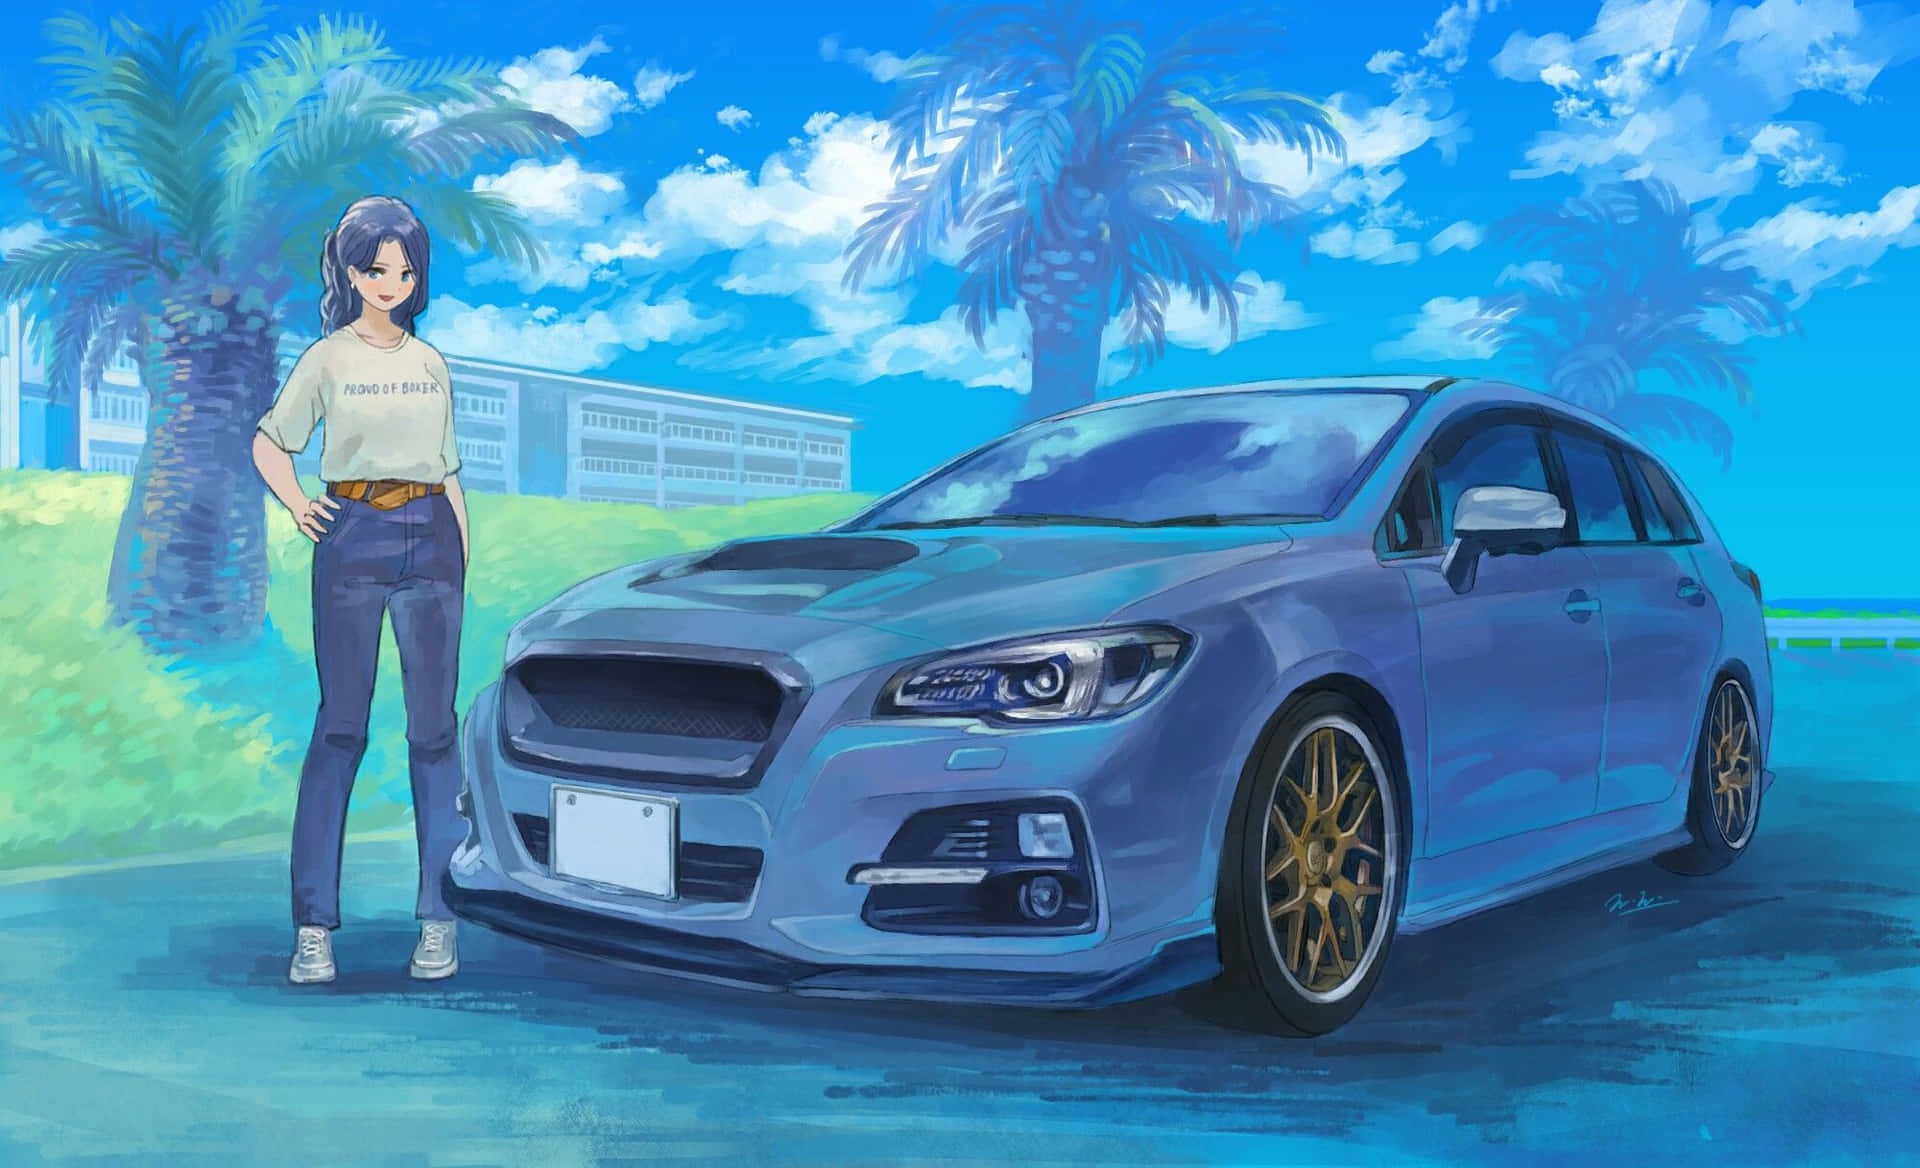 Feel the rush of anime style in this closeup of an Anime Car